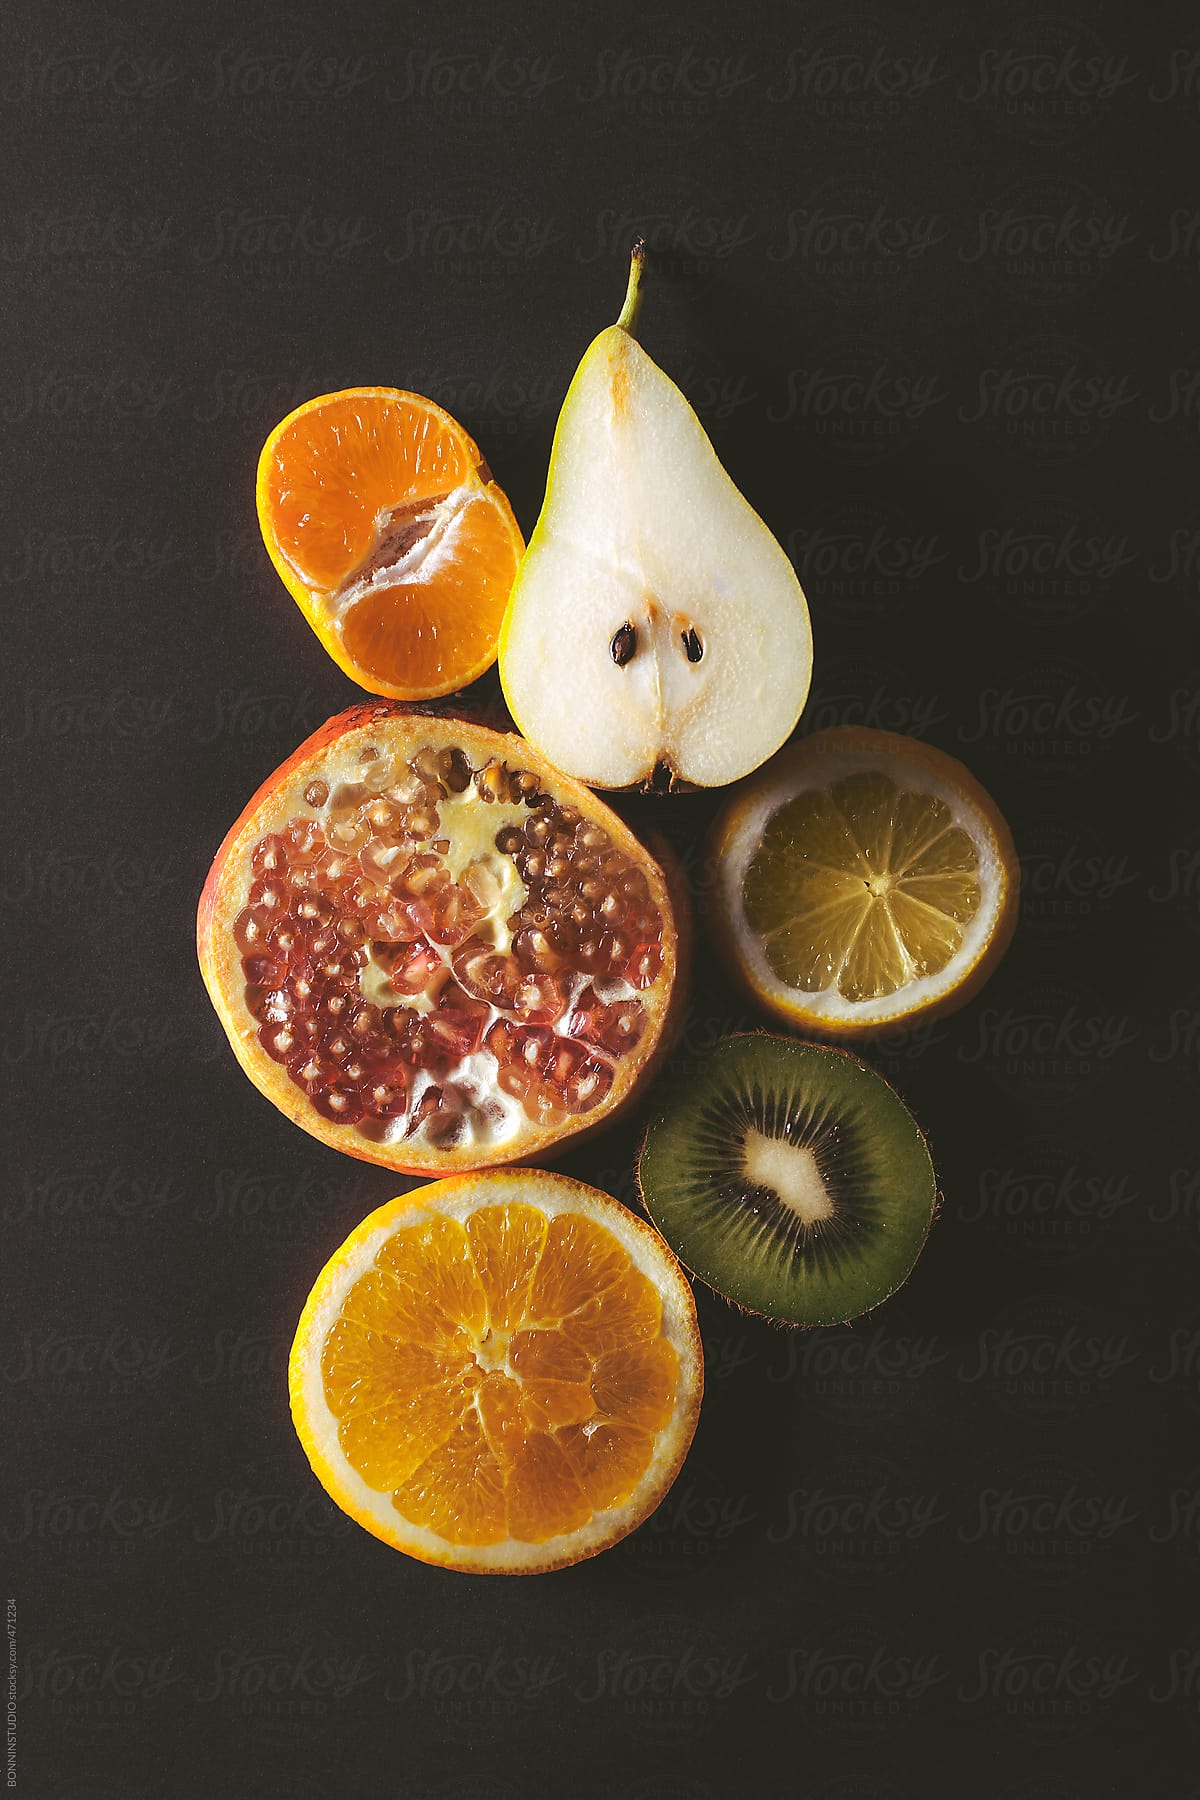 Overhead of sliced variety of fruits on black background.